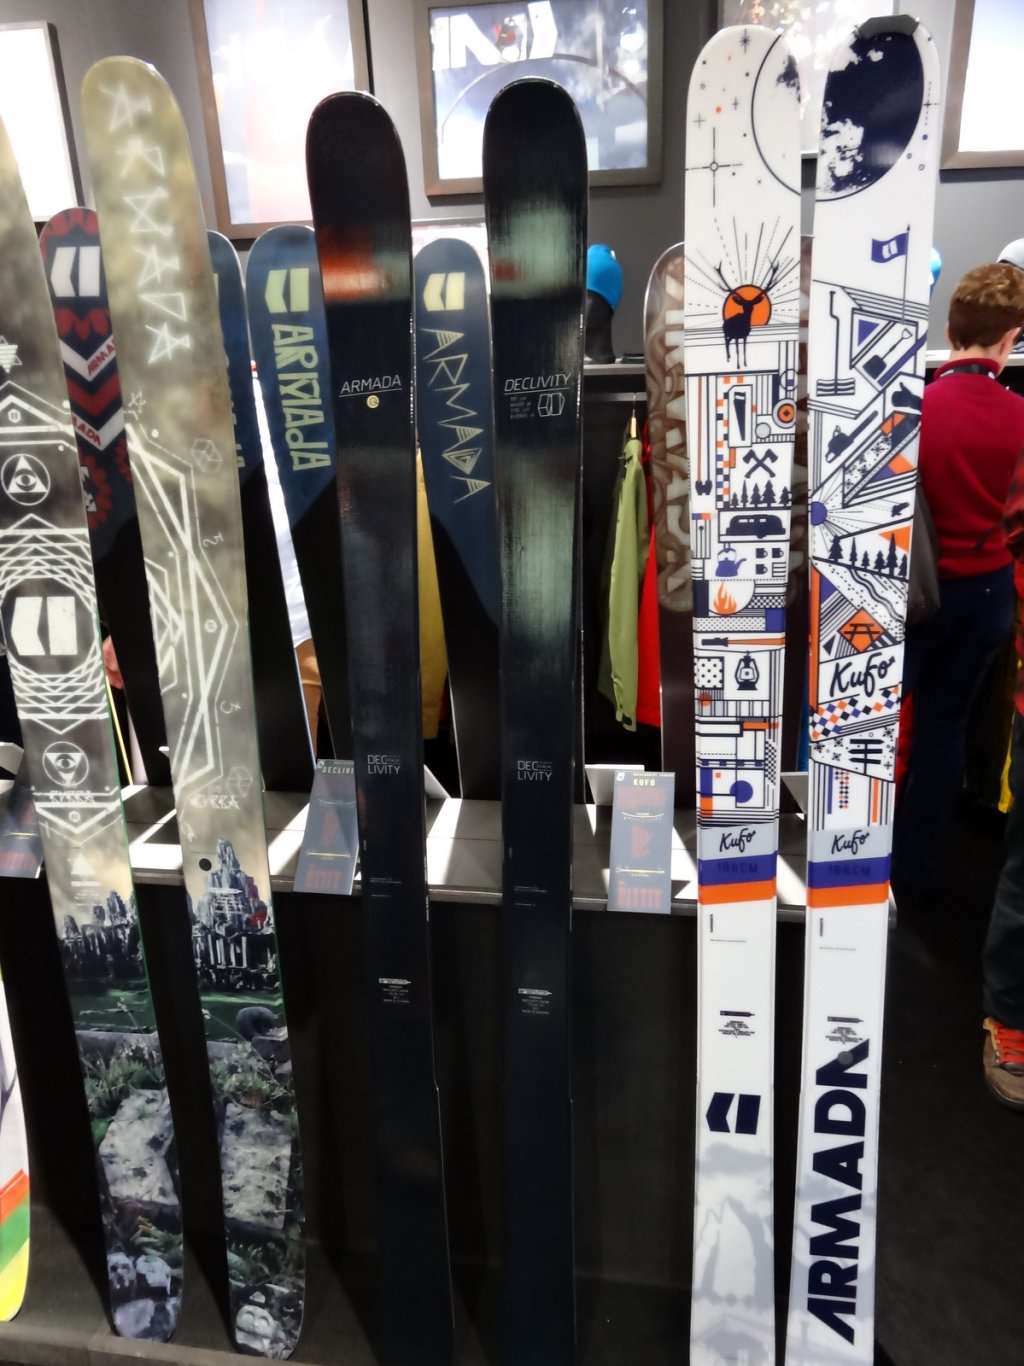 Armada touring ski. Black in the middle is the Declivity, JP Auclair's new ski for mountaineering. On the right in white/bund the Kufo, 120-133-103-124 @ 186, light touring ski